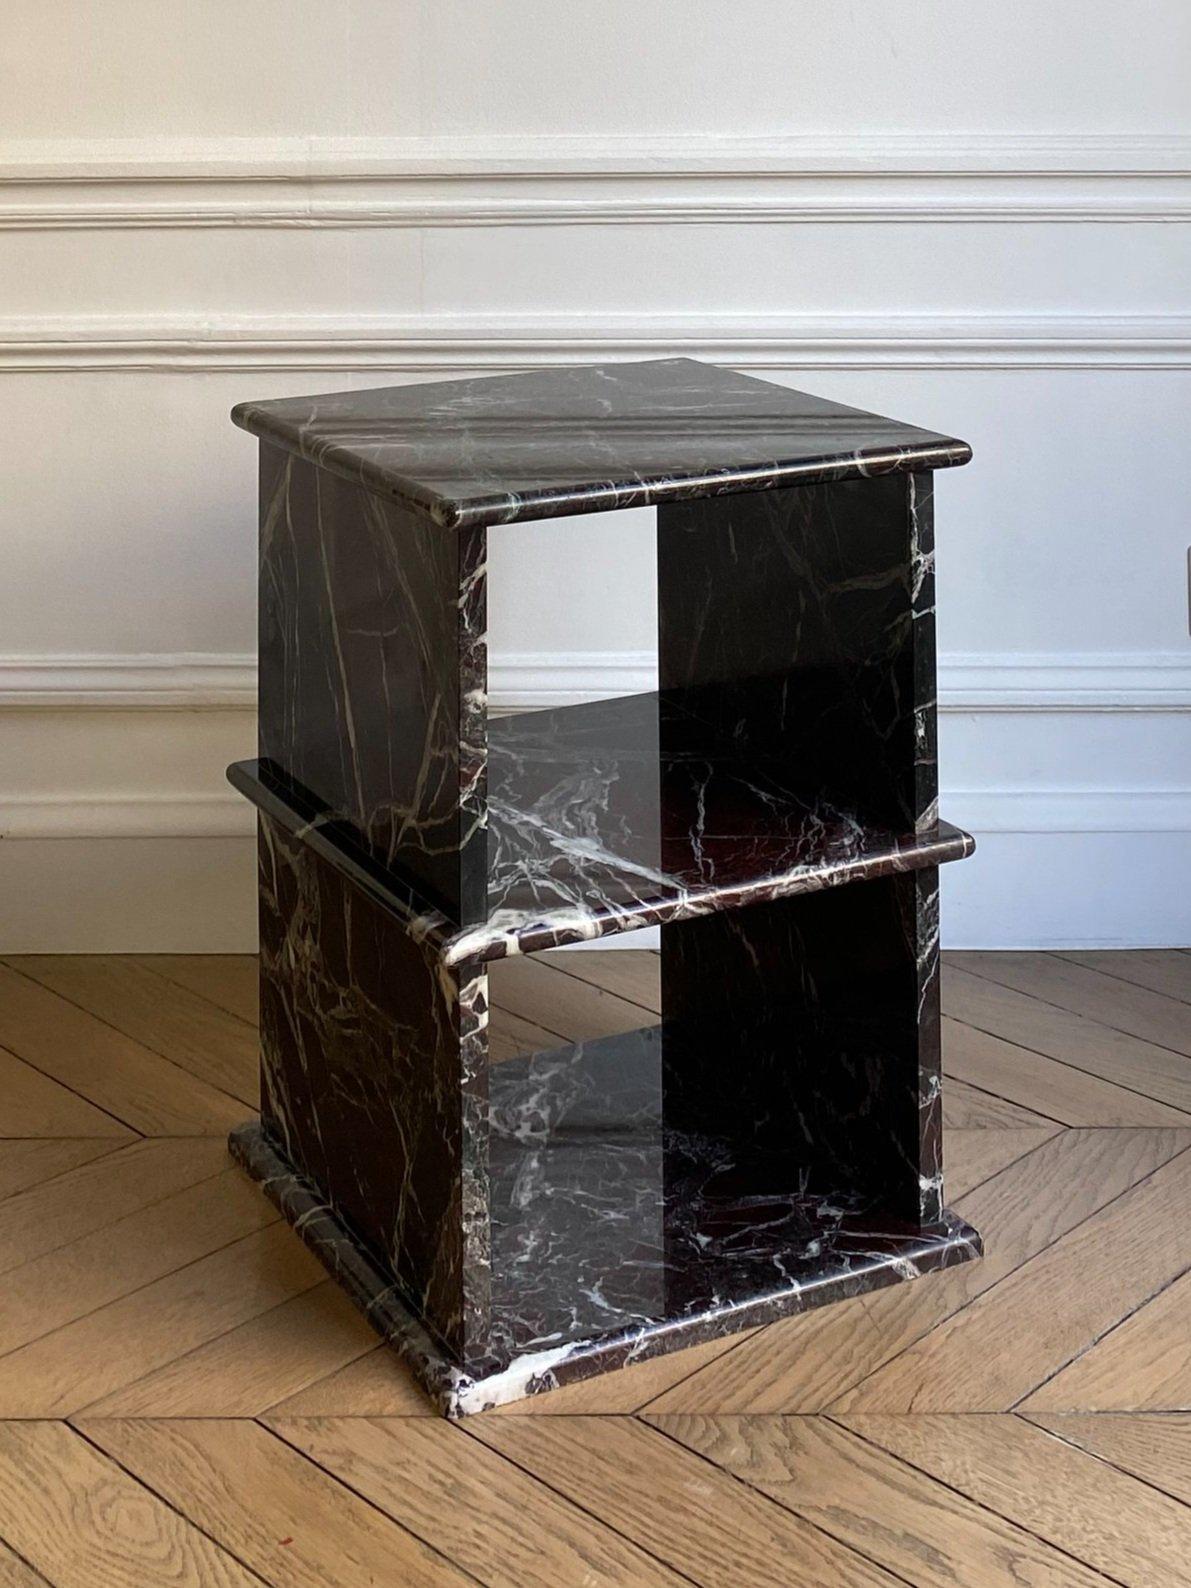 Rosso Levanto The Side Table by ALMARMO
Dimensions: D 40 x W 40 x H 57 cm. 
Materials: Polished Rosso Levanto marble.

“The Side Table” has been designed as a collectible - a unique and vibrant piece that celebrates the singular nature of the stone